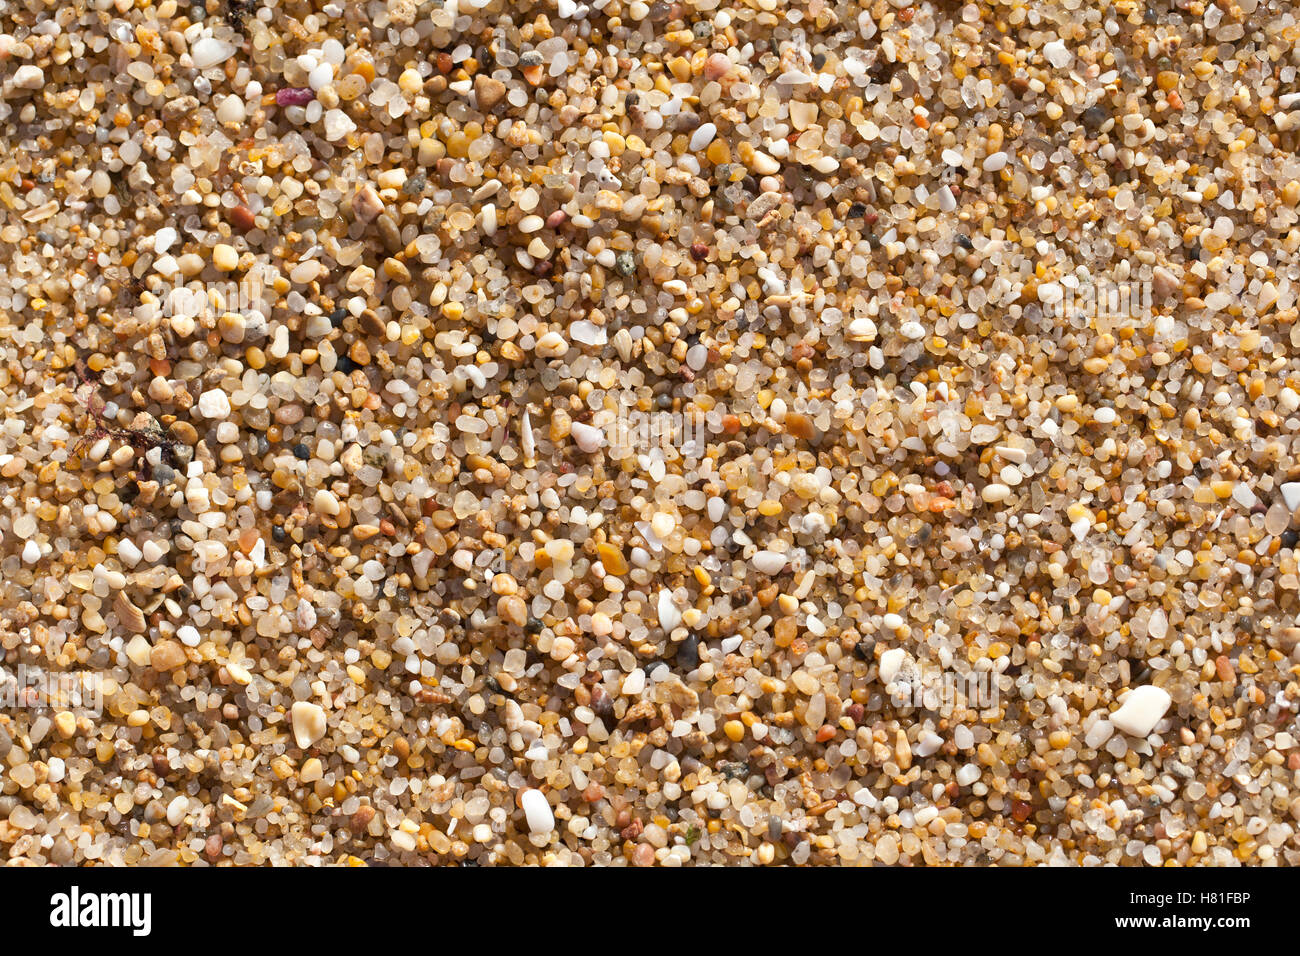 Close-up view of beach sand Stock Photo